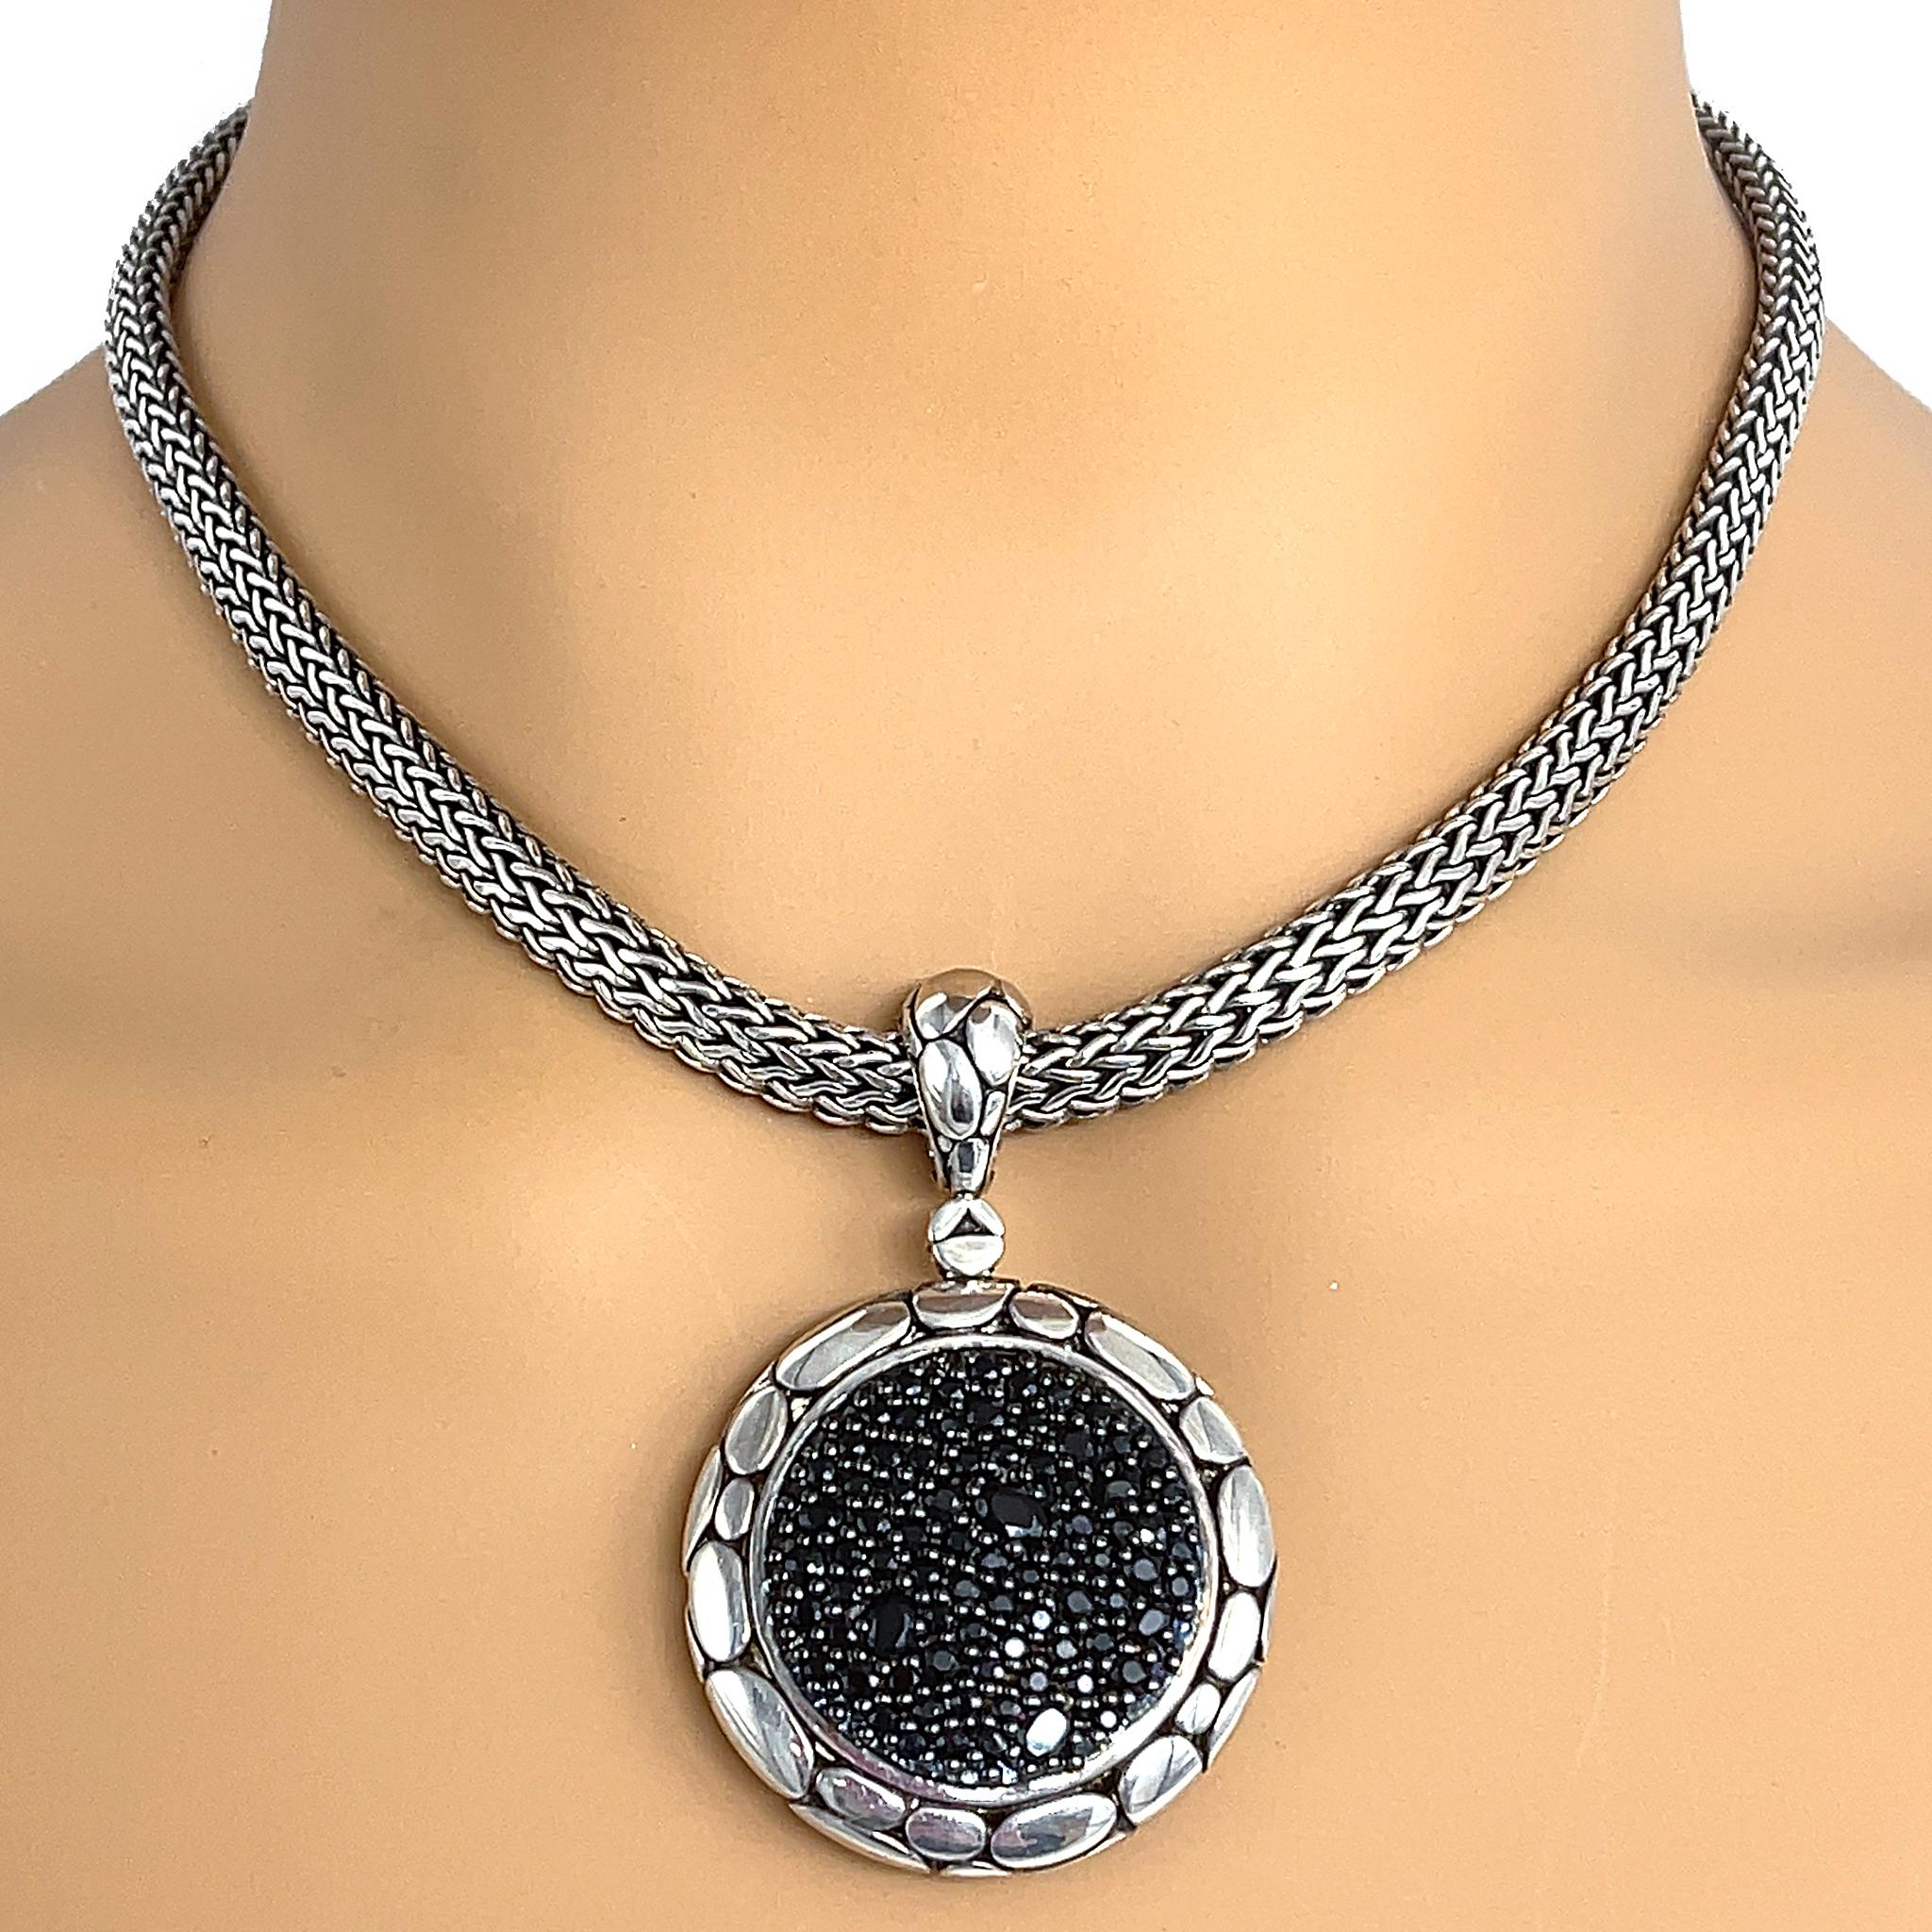 Sterling Silver
Pendant Dimensions: 55MM x 34.5MM
Stone: Treated Black Sapphire
The pendant comes with the John Hardy Icon Chain Necklace in 5mm 
Chain is 16 inches in length